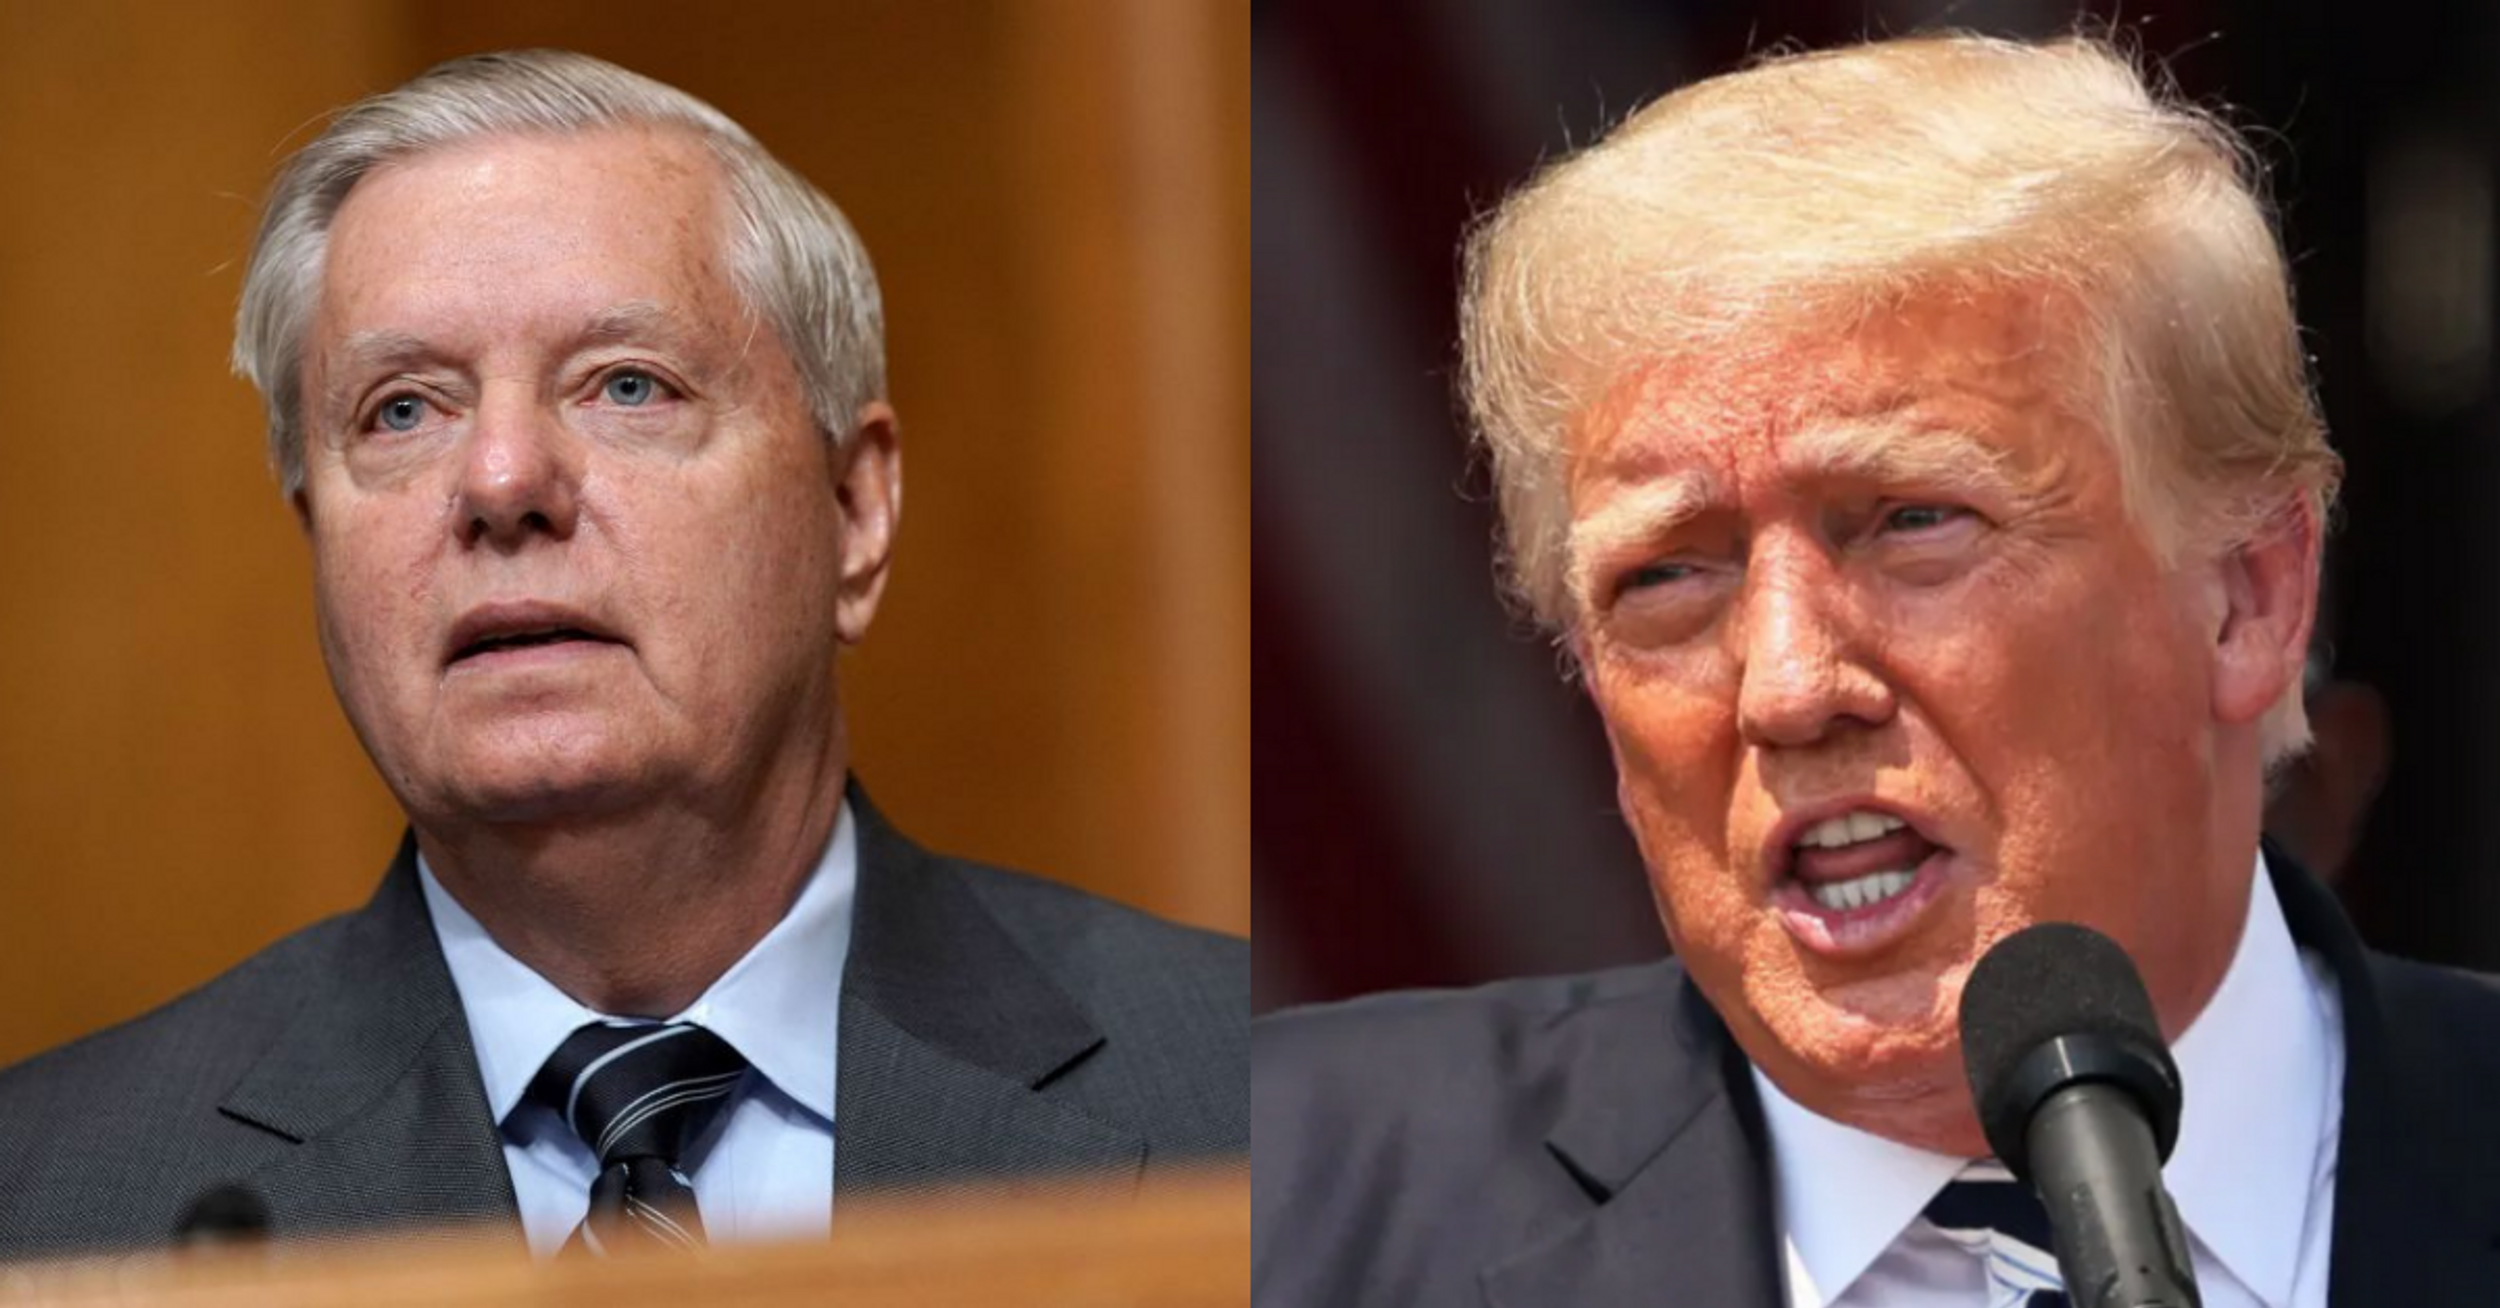 Lindsey Graham Slams Trump's Pledge To Pardon Capitol Rioters If He Wins In 2024 As 'Inappropriate'